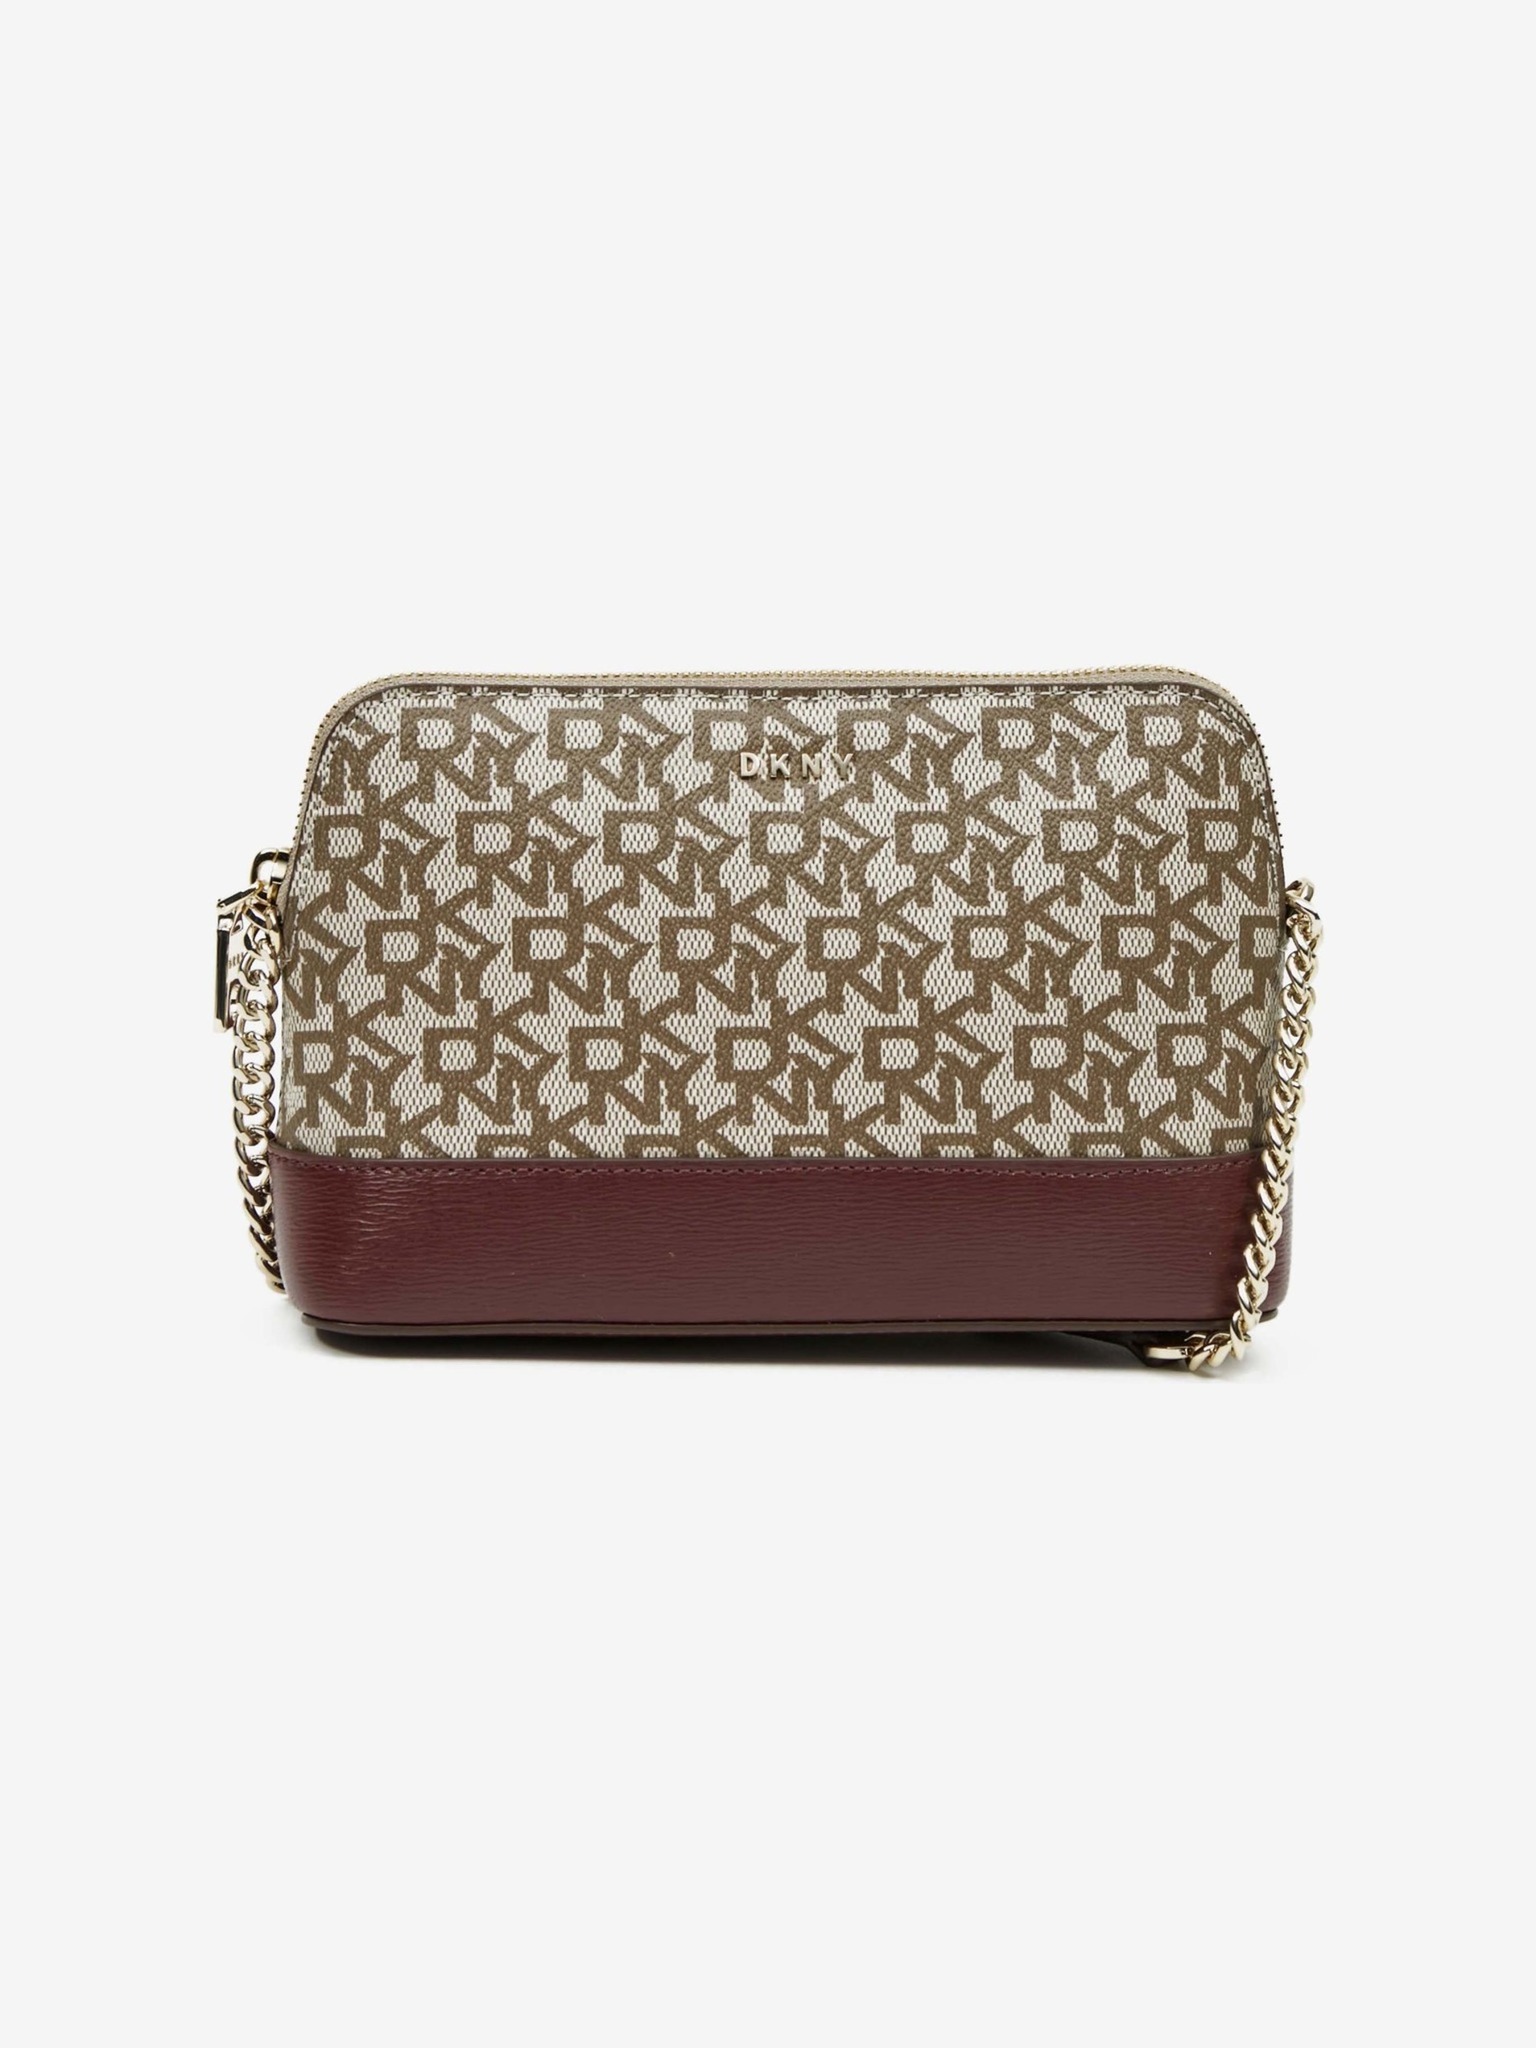 Shop Dkny Women Brown Printed Sling Bag | ICONIC INDIA – Iconic India